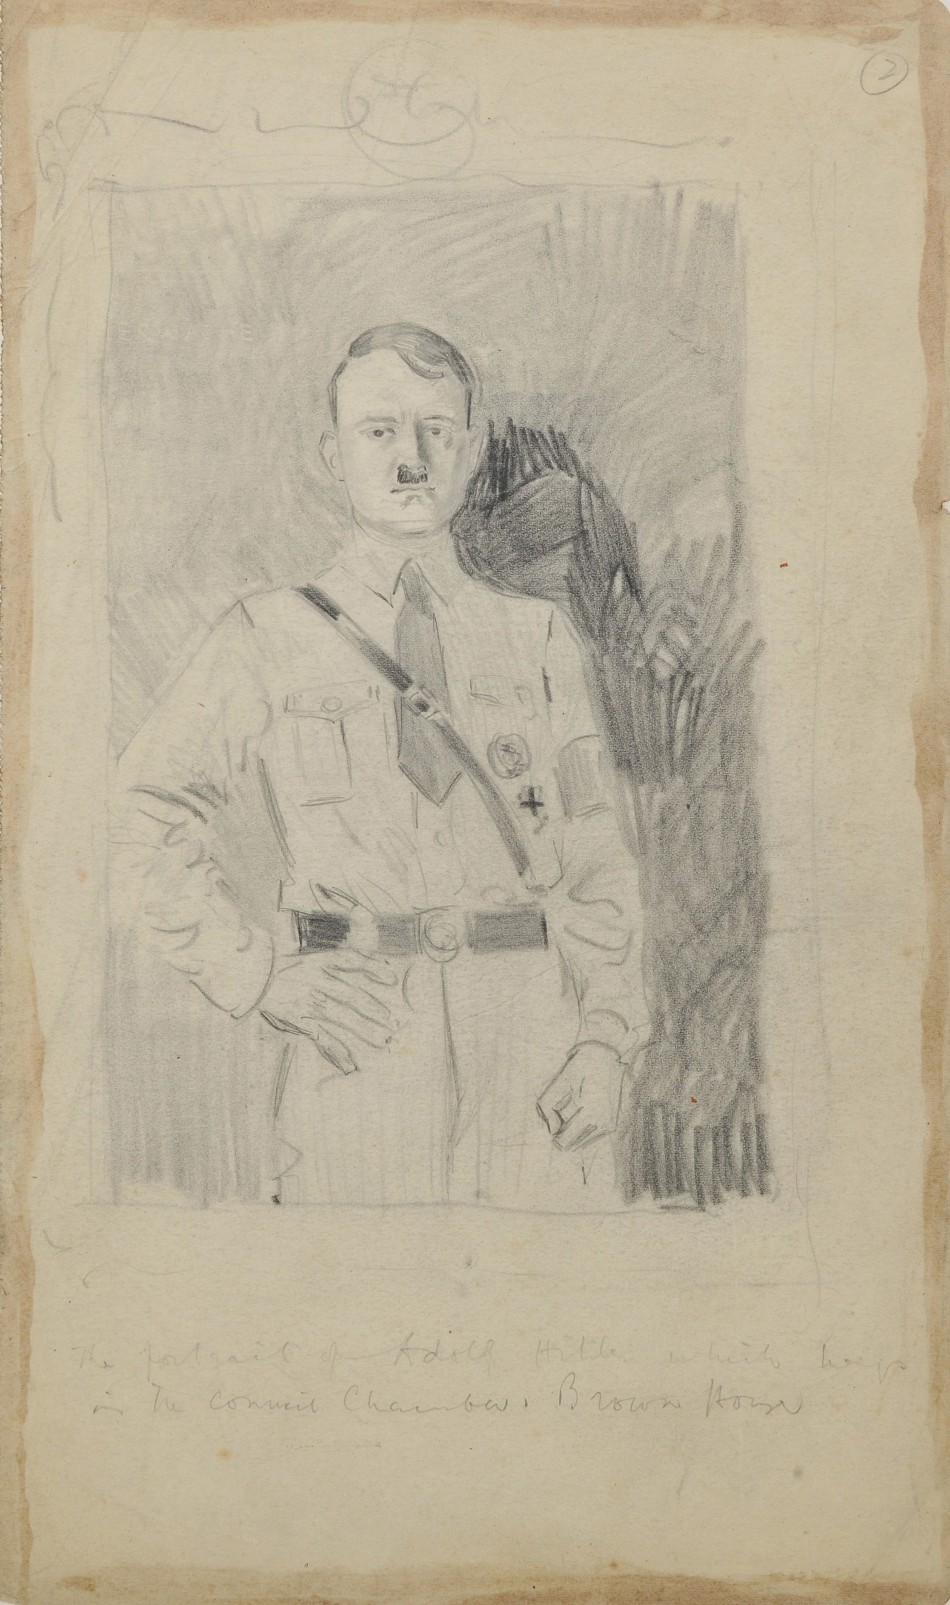 Drawings of Hitler and his henchmen sketched in the early days of the Nazi party by British artist Helen McKie have emerged.